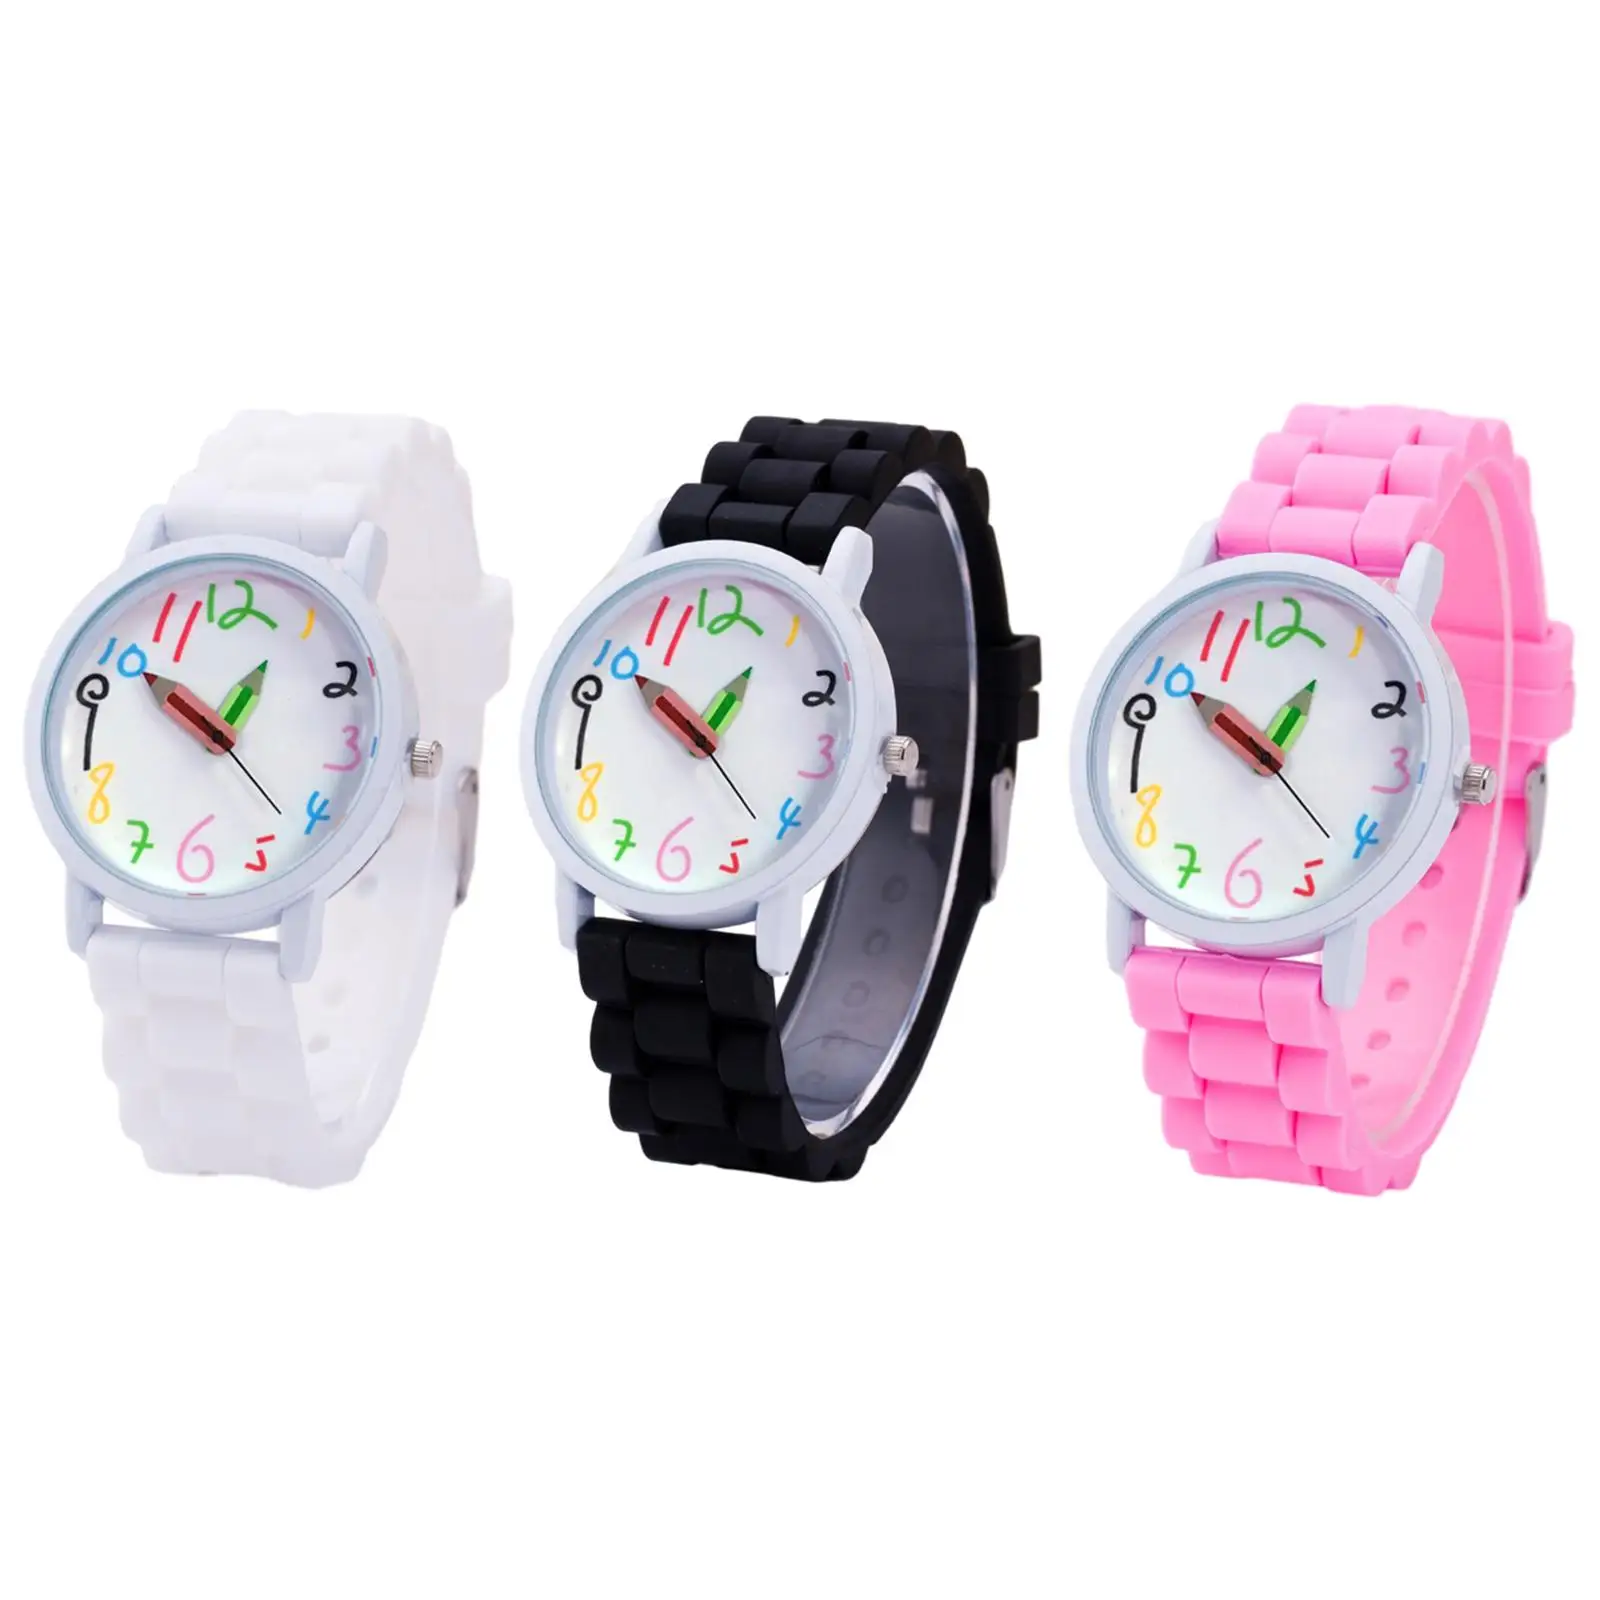 Silicone Watch for Women and Children, Strap Watch for Travel, Mochila